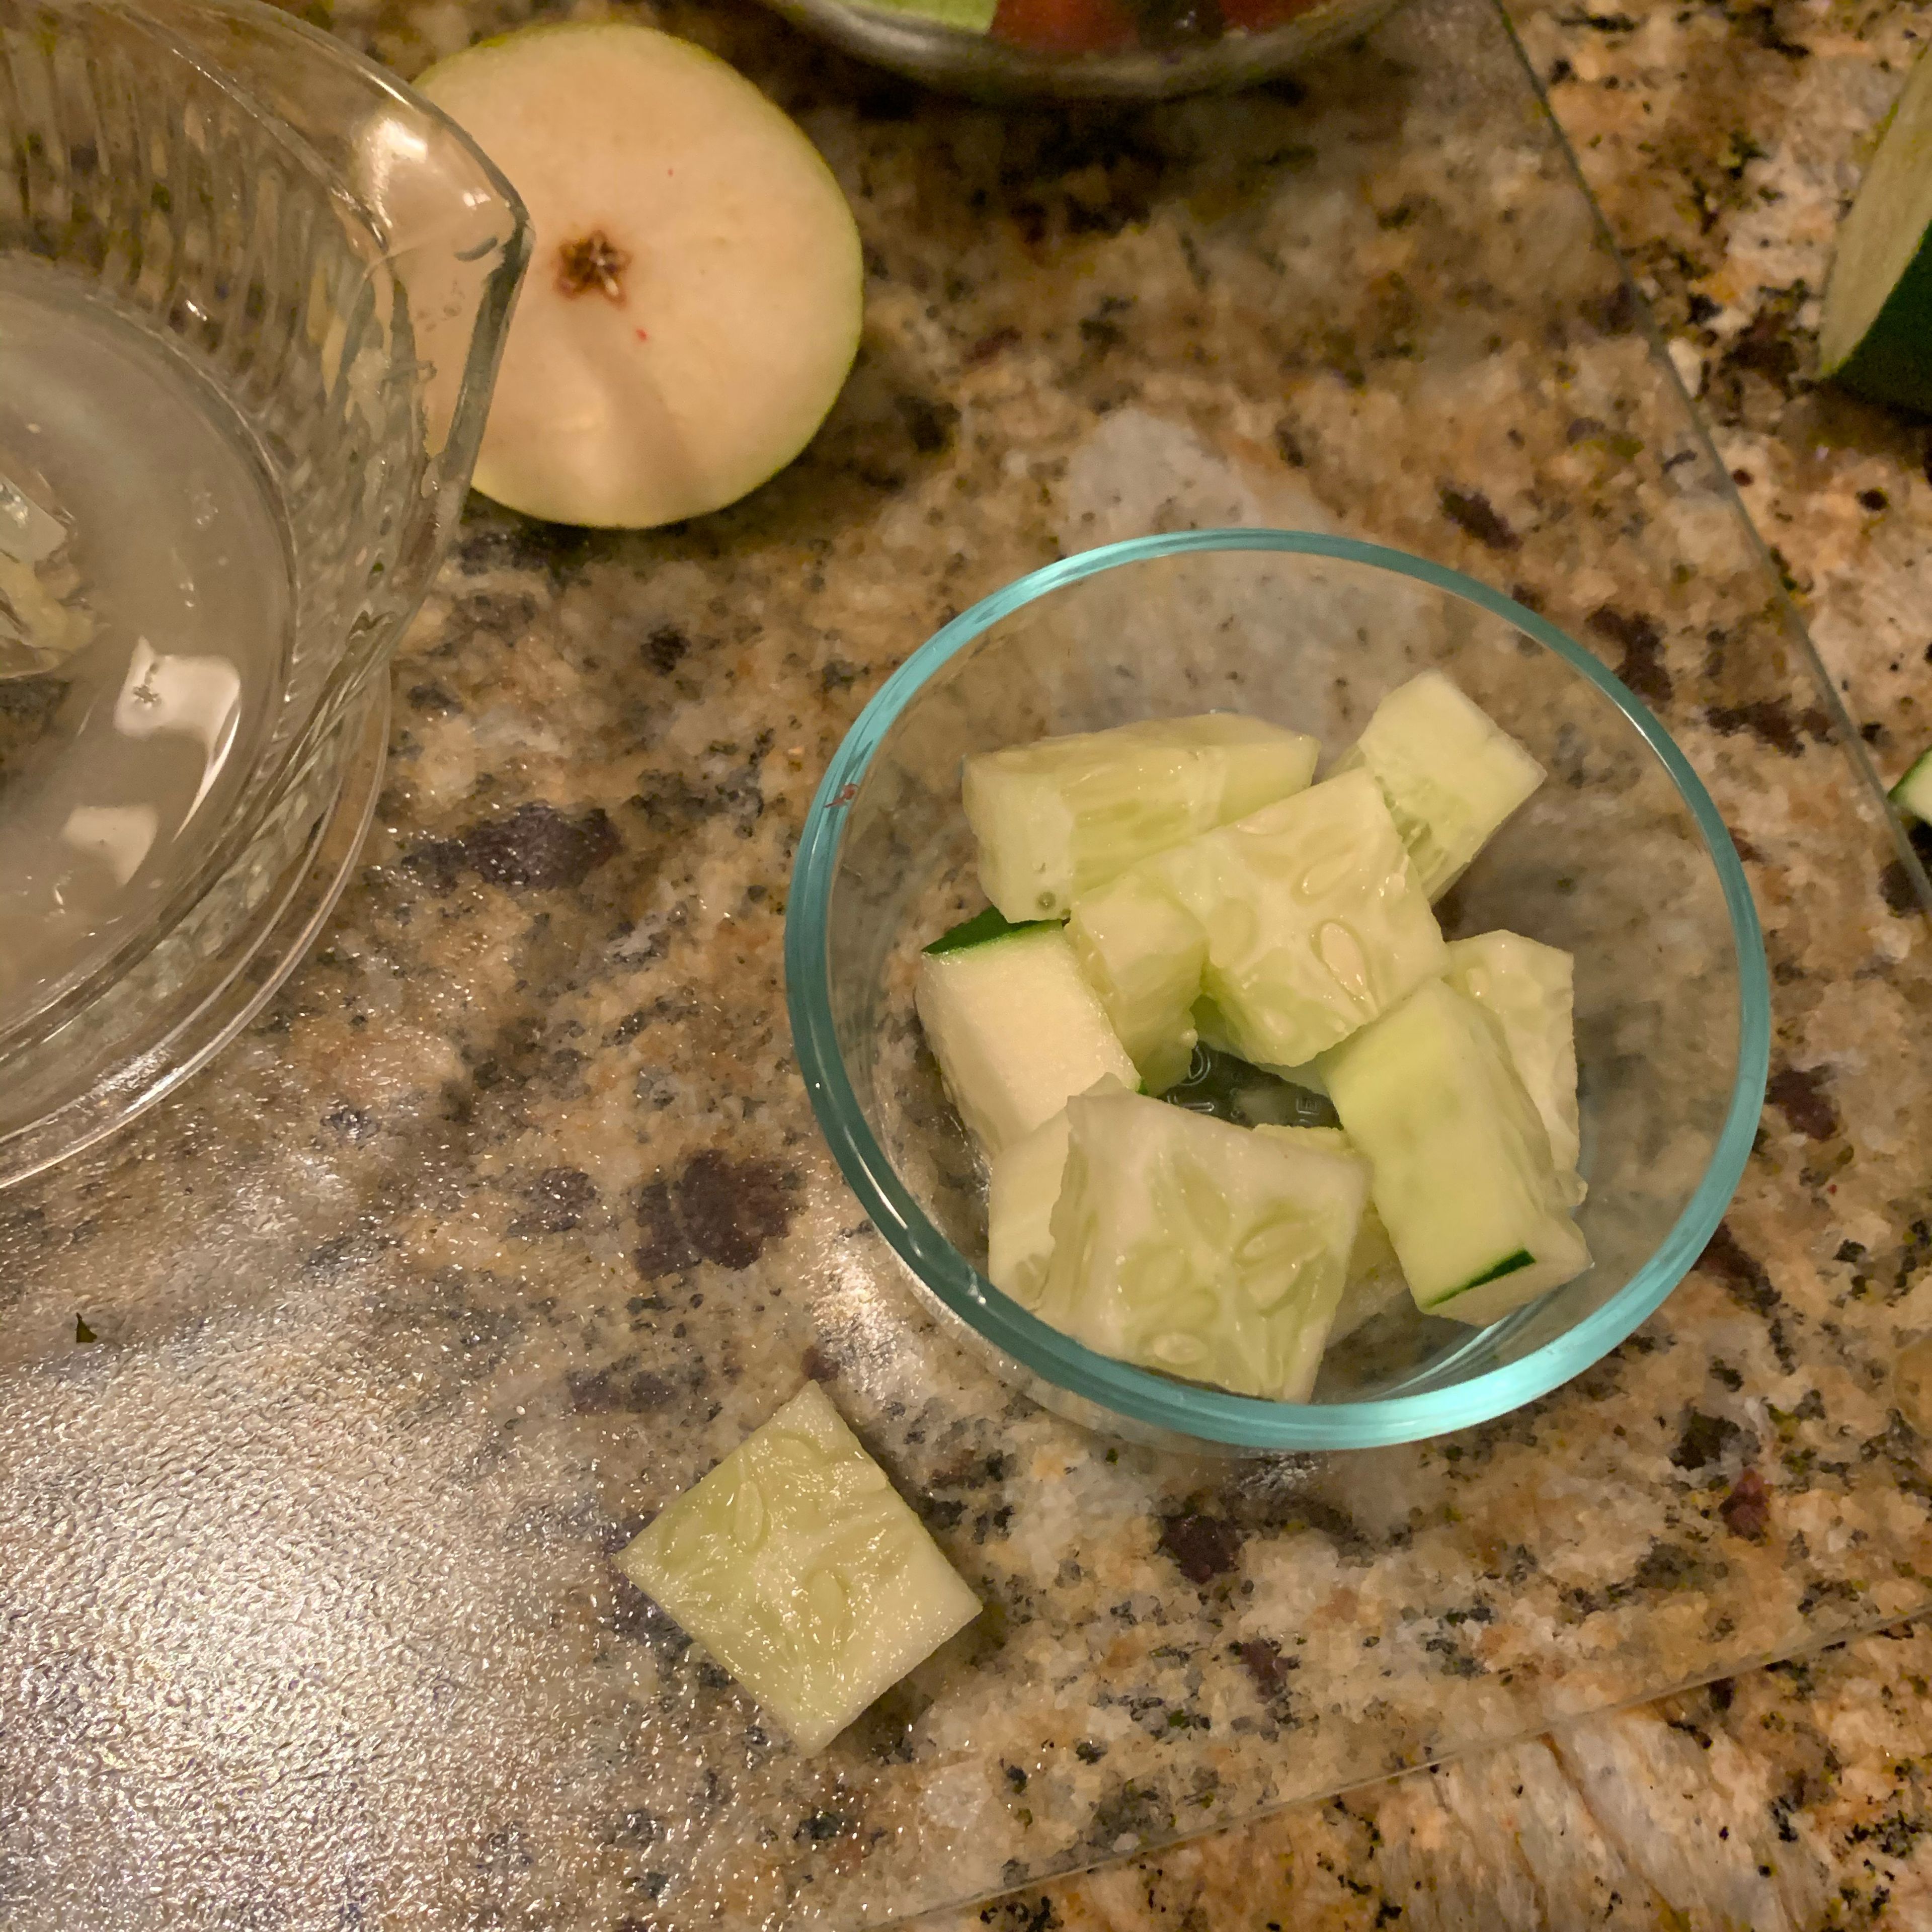 Cut up half of cucumber into small squares and add to fruit mixture.